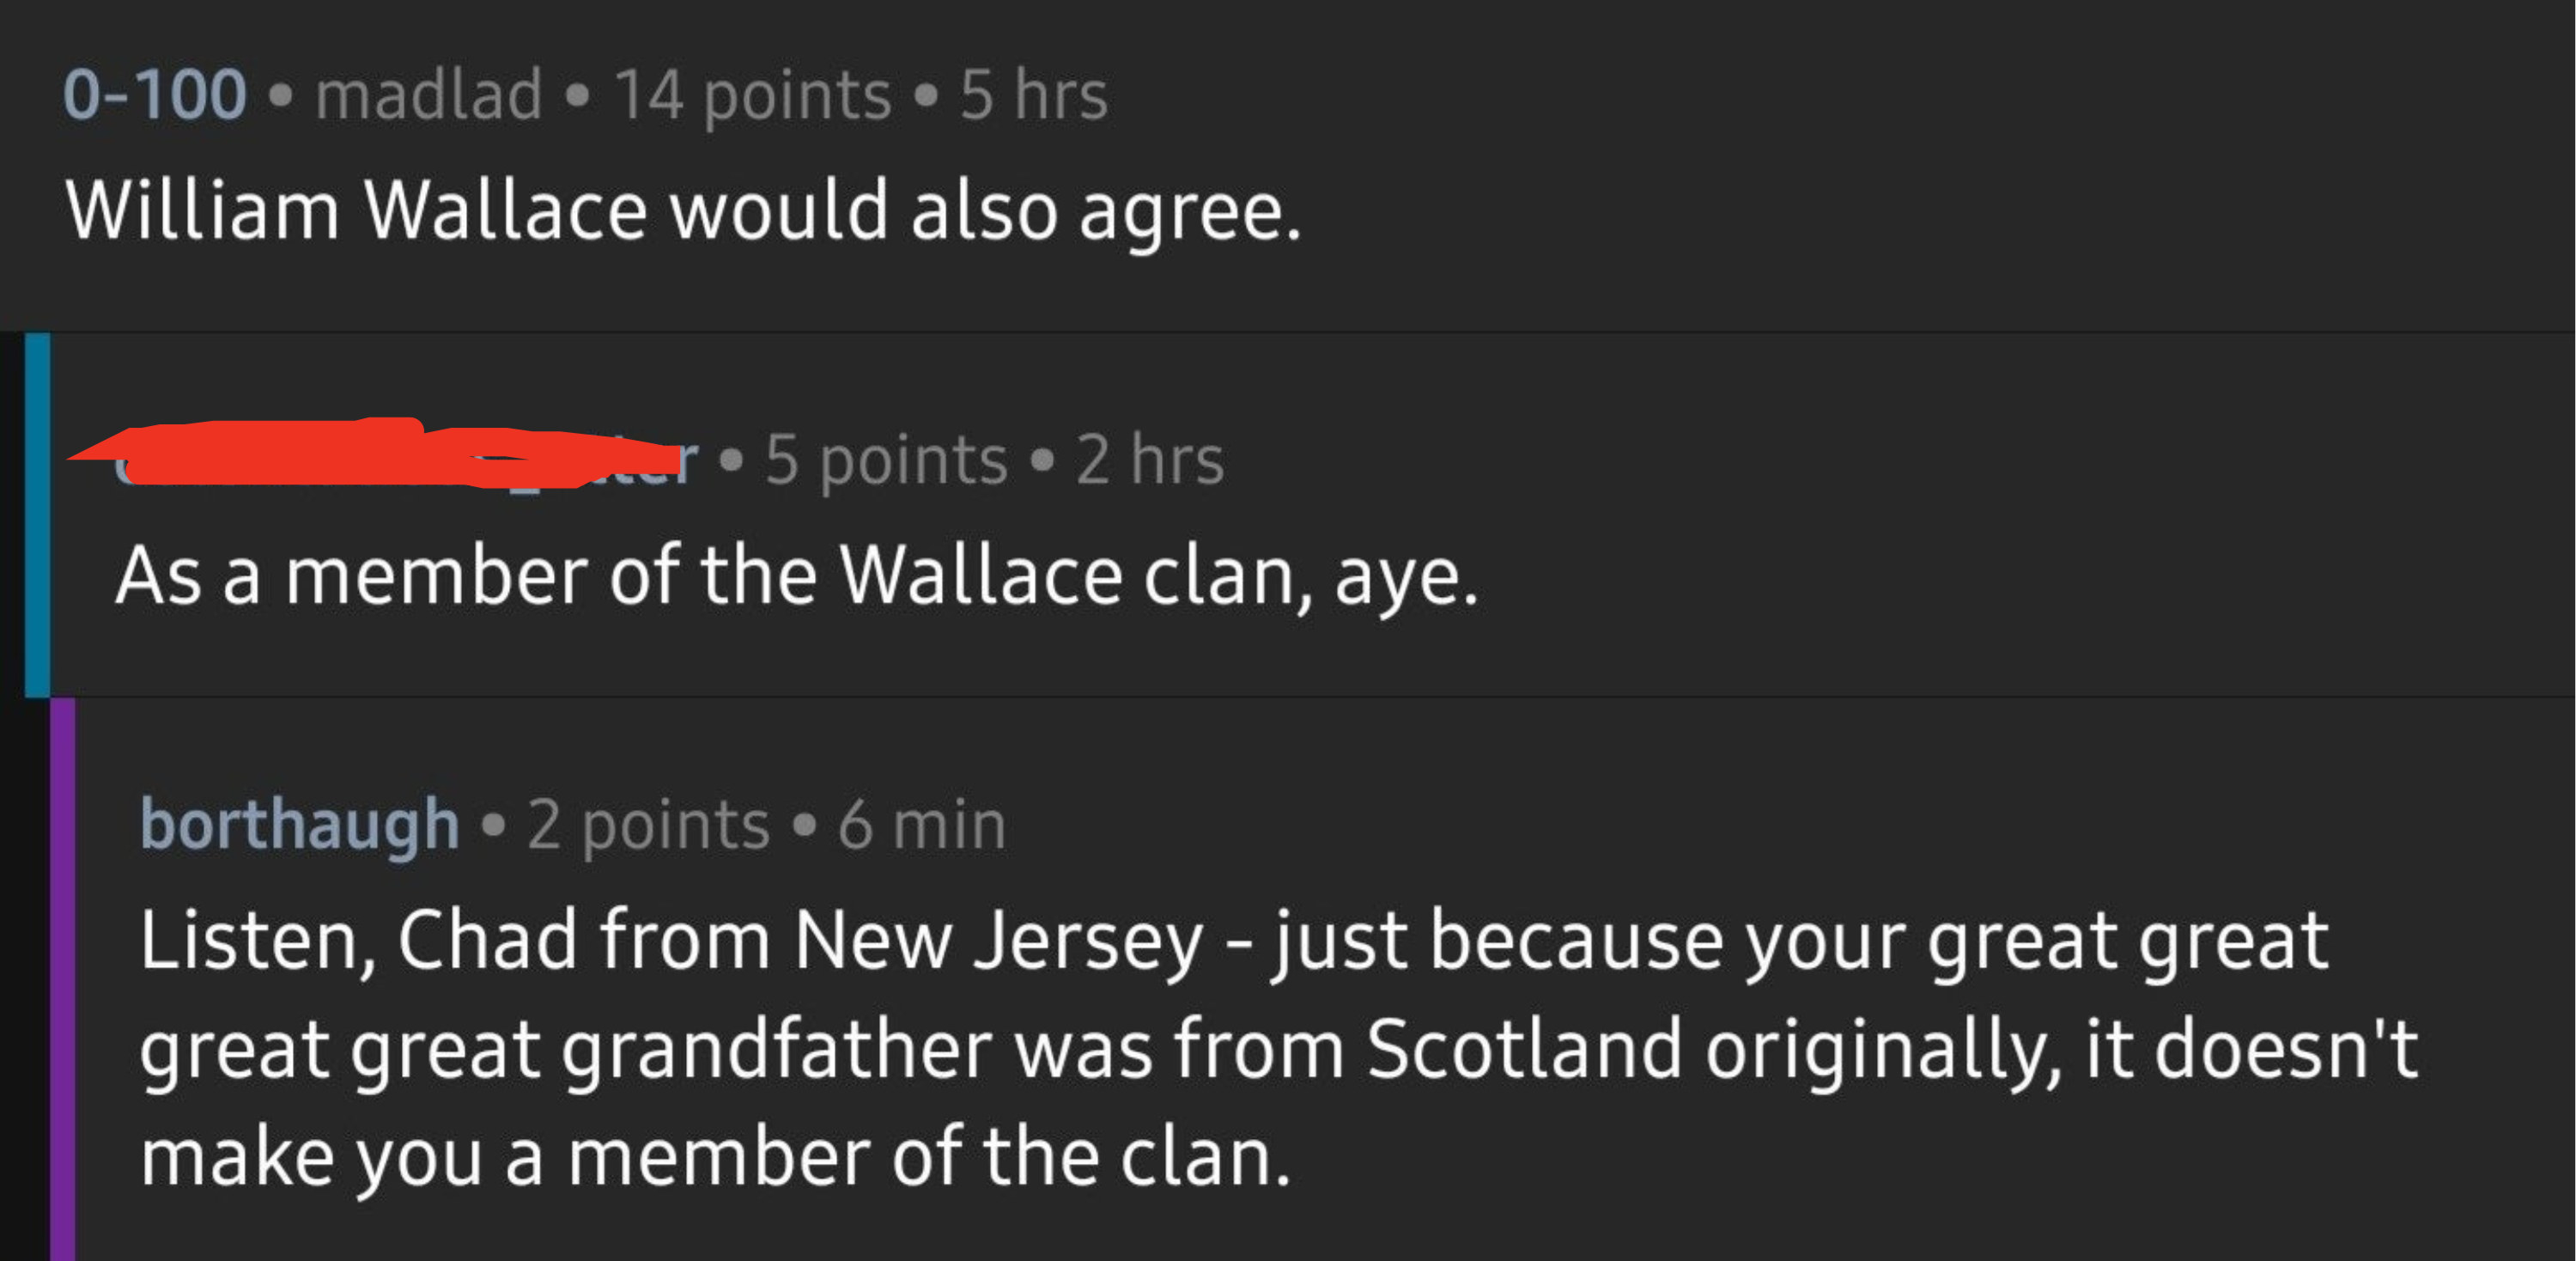 Person who says they are Scottish despite being American